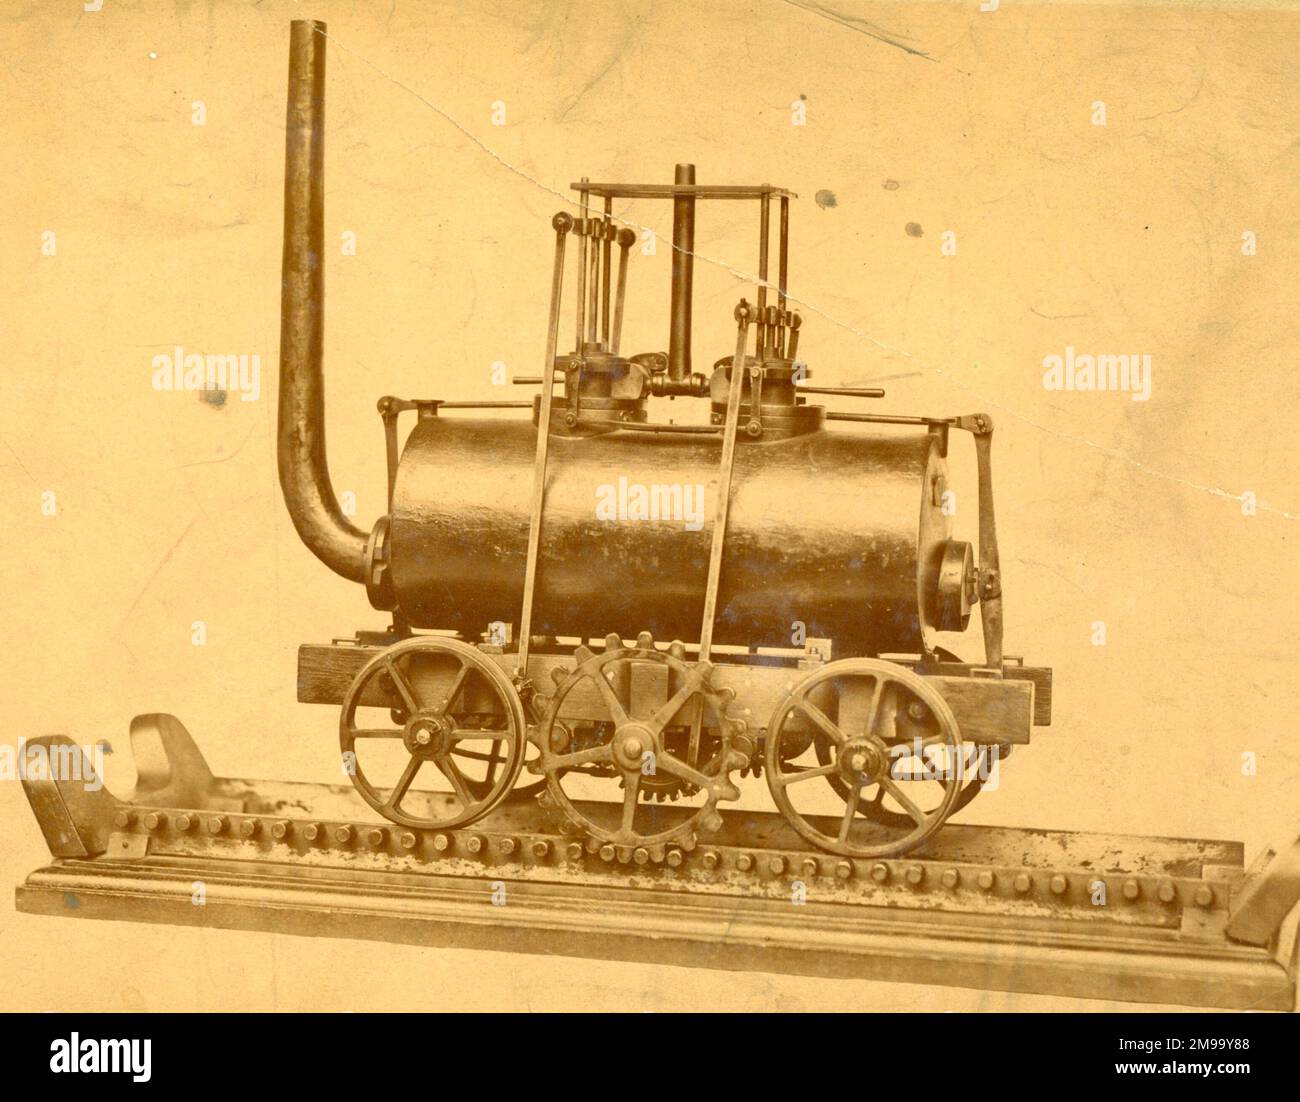 Model of Matthew Murray's steam locomotive propelled by a toothed wheel engaging in a rack on one of the rails, used 1812-1835. Stock Photo